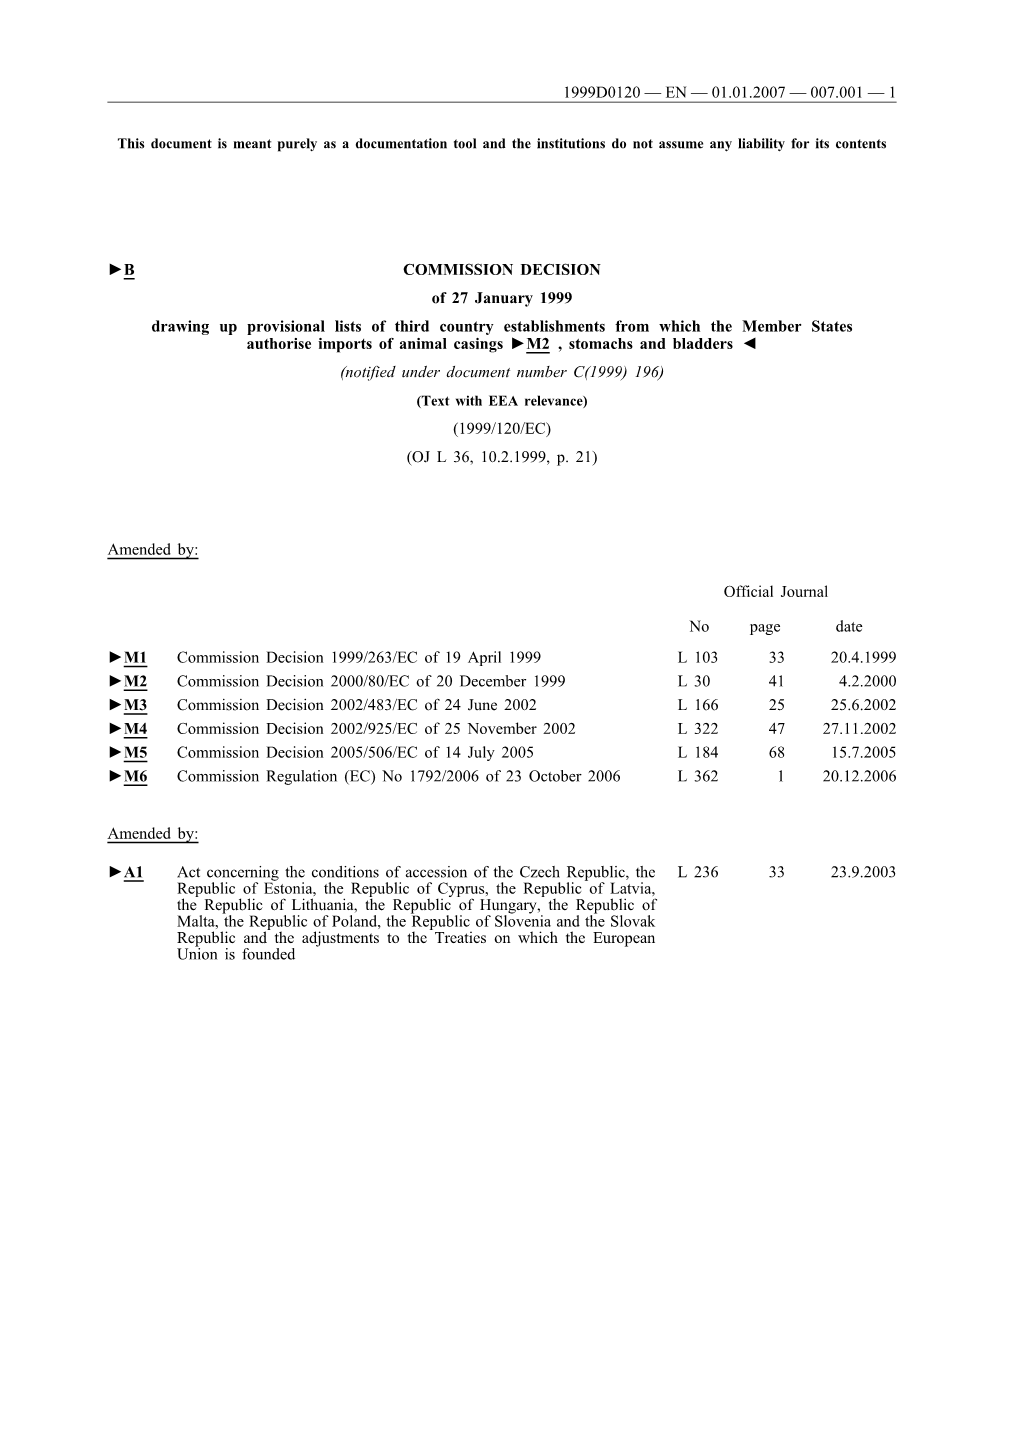 B COMMISSION DECISION of 27 January 1999 Drawing